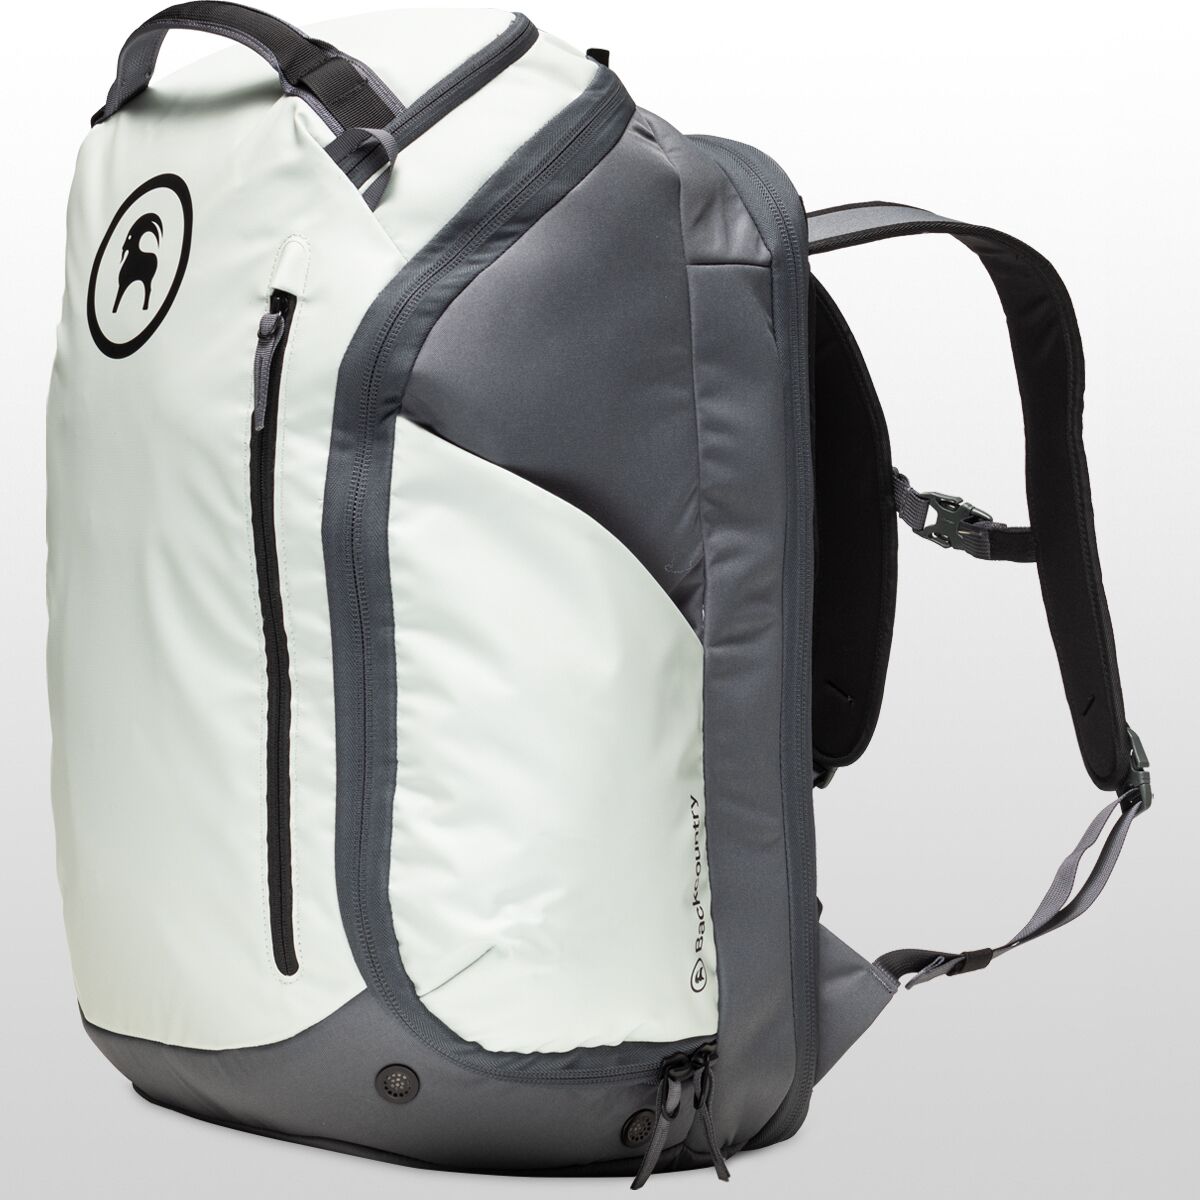 The Db Fjäll 34L Backpack Is Built For The Backcountry - IMBOLDN